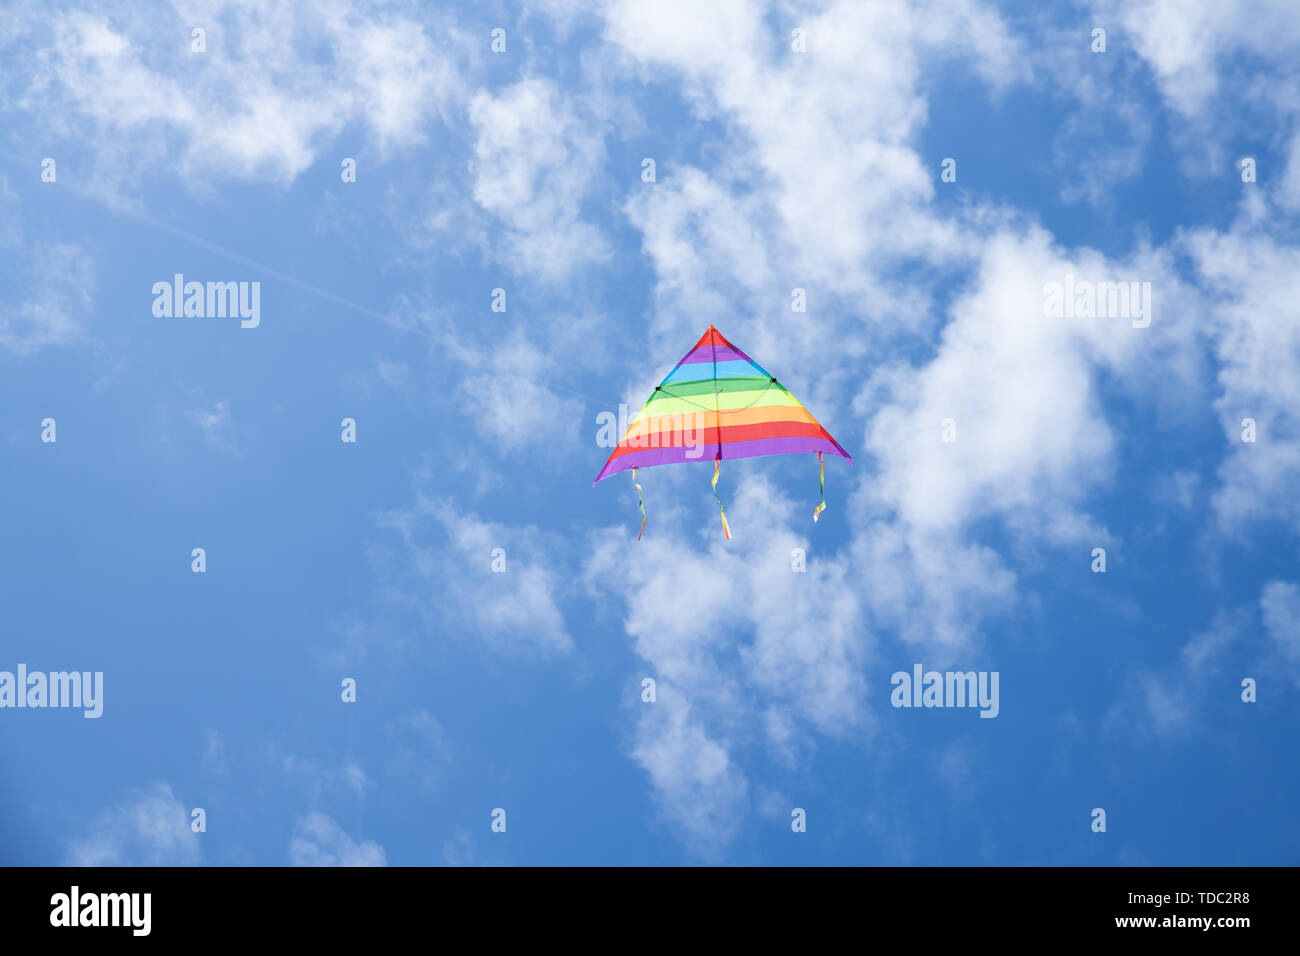 Multicolored kite on the background of the blue sky with clouds Stock Photo